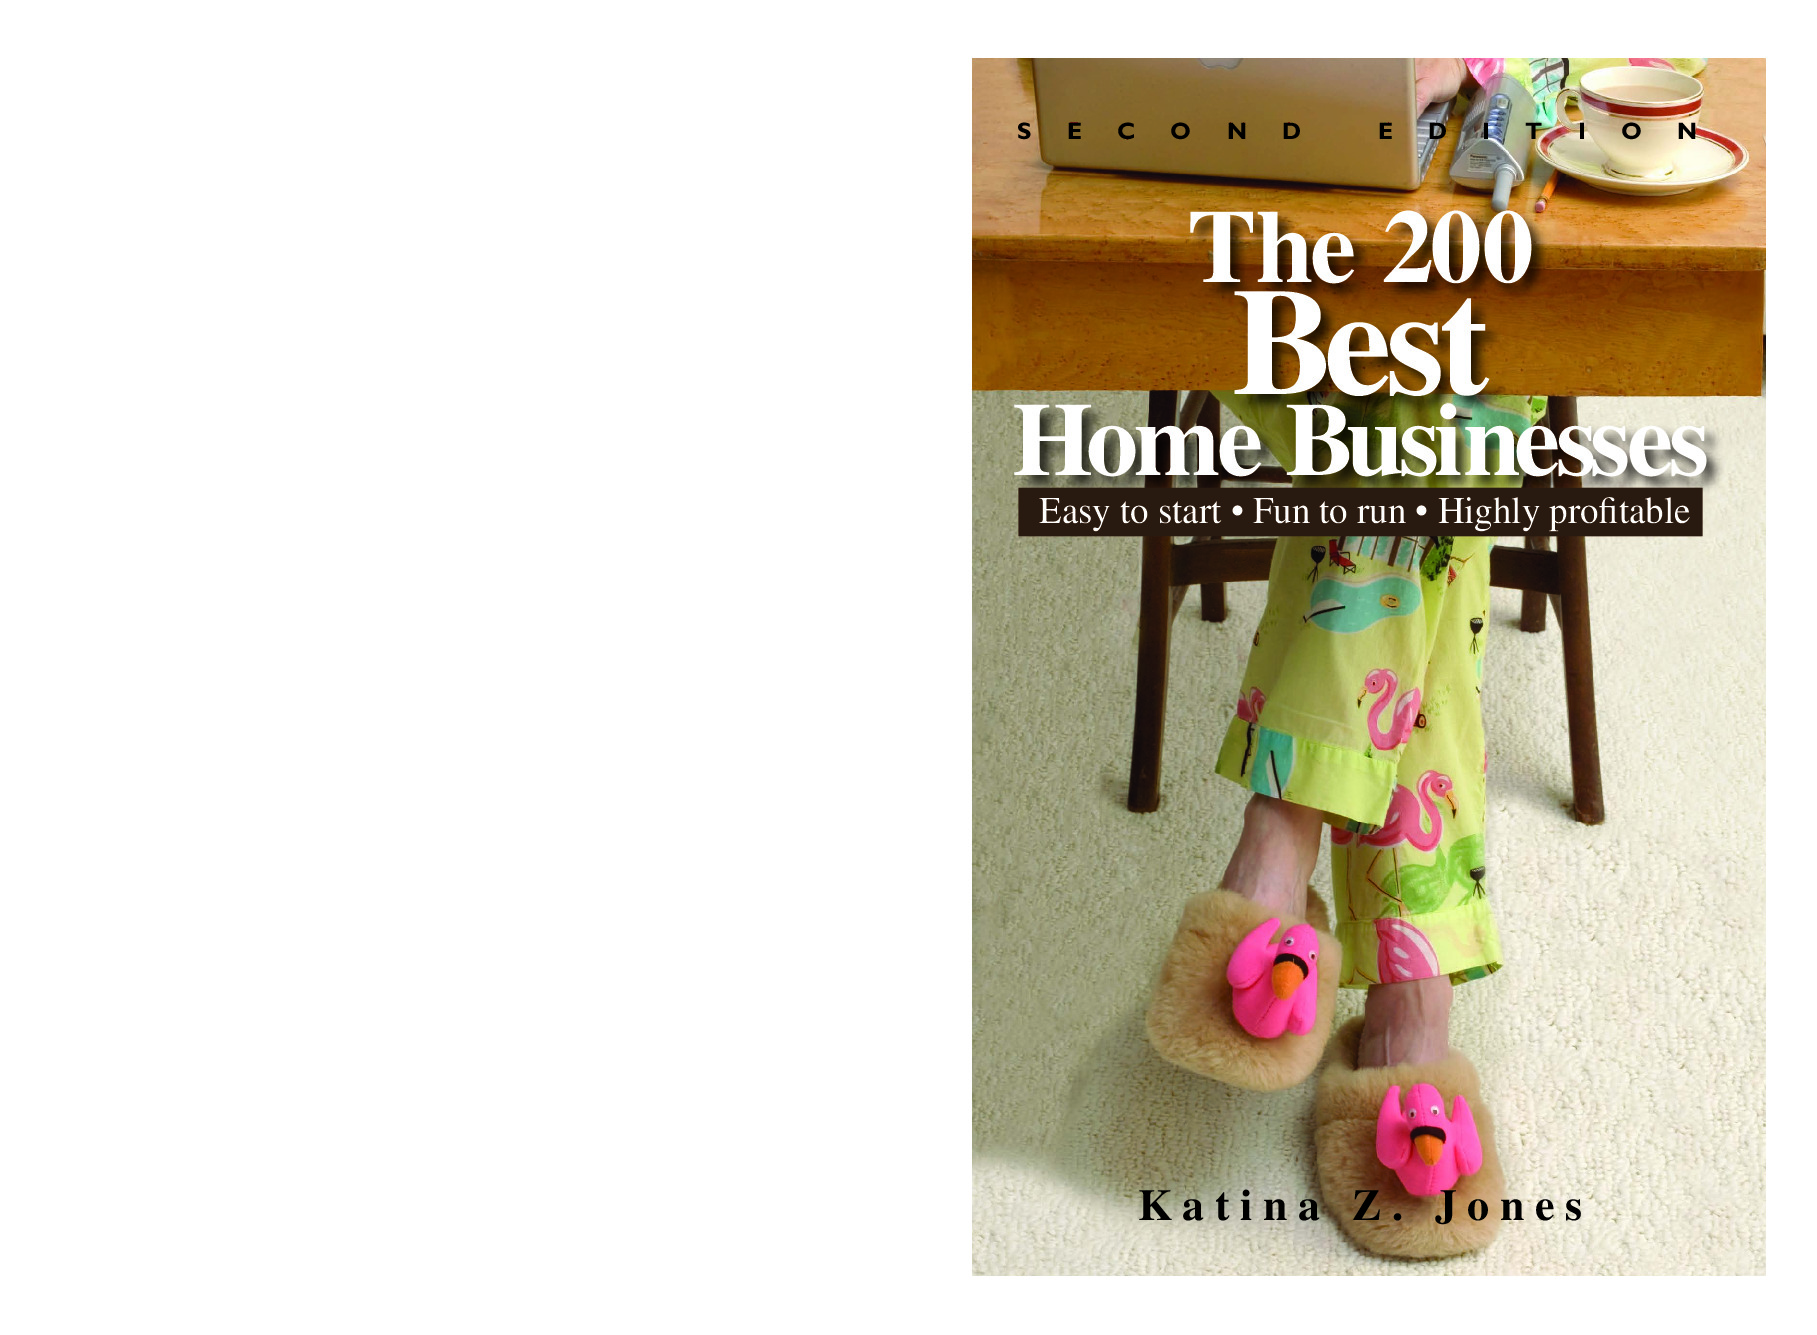 The 200 Best Home Businesses